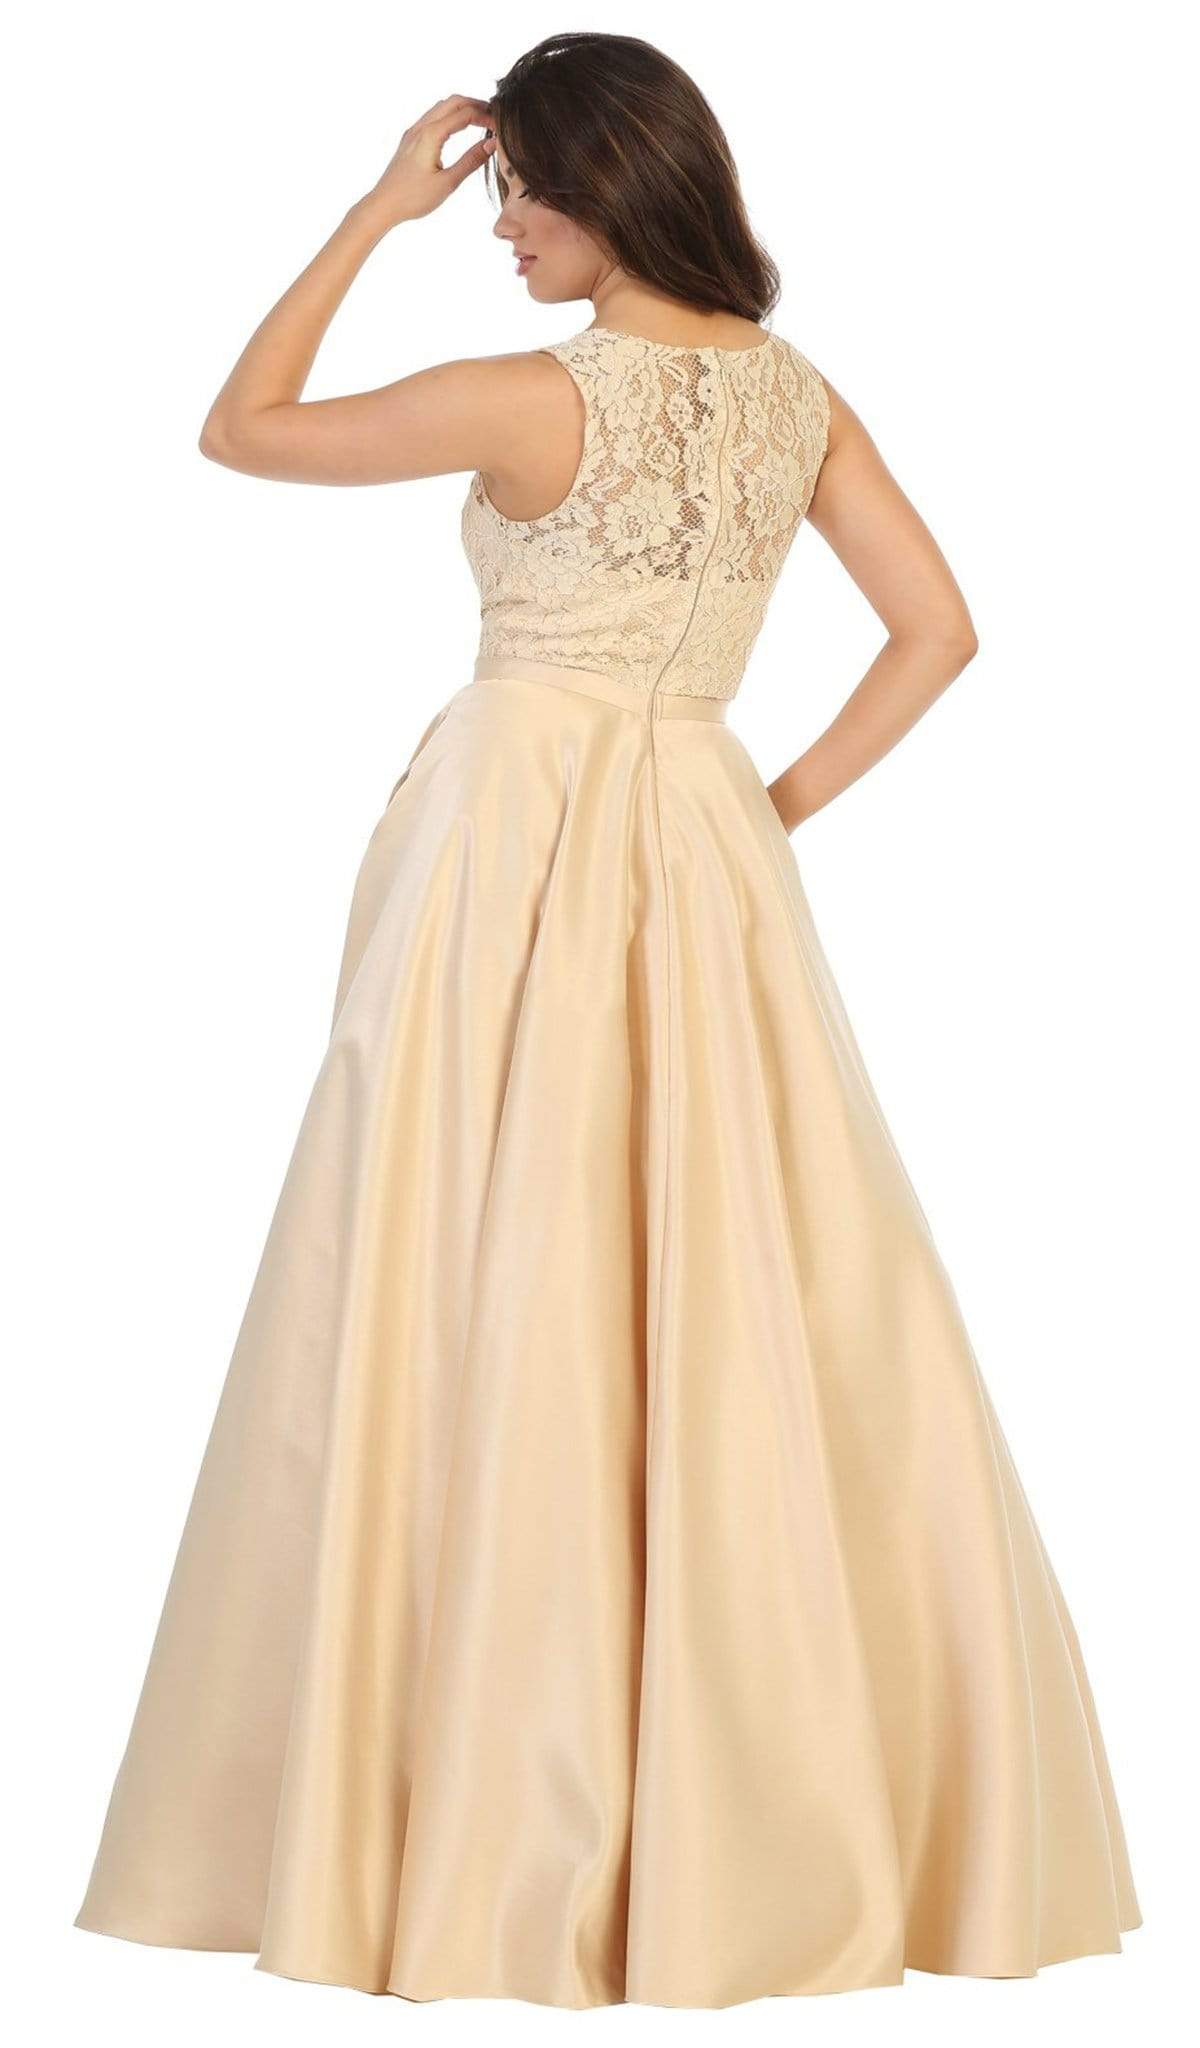 May Queen - MQ1688 Lovely Lace Tank Bow Accent Satin Long Dress Bridesmaid Dresses